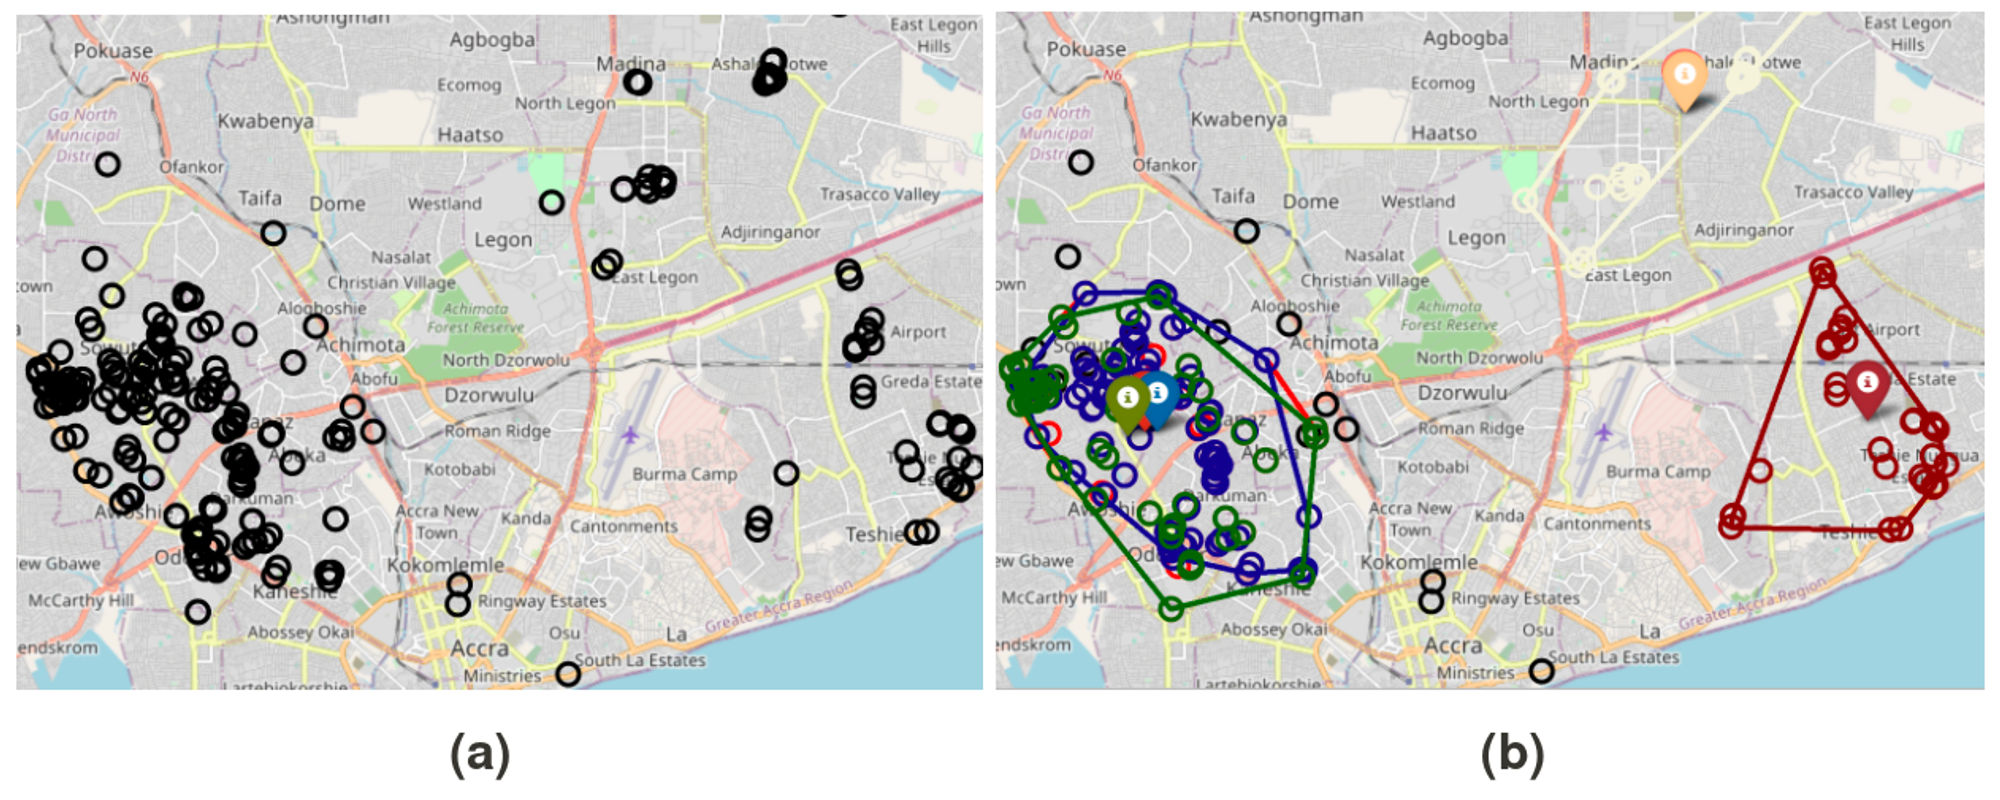 Figure 4: Repeated outages involving the same set of sensors could signal a problem with a specific distribution transformer. Map of clustered outage reports for between "2021-06-02 21:00:00" to "2021-06-03 21:00:00" in Accra. The purple, green, red, colored clusters around the same area means these are three outages that occurred at different times but on approximately the same sets of sensors. These sensors are likely connected to the same feeder or transformer which keeps failing causing the outages to be reported on the same set of sensors.